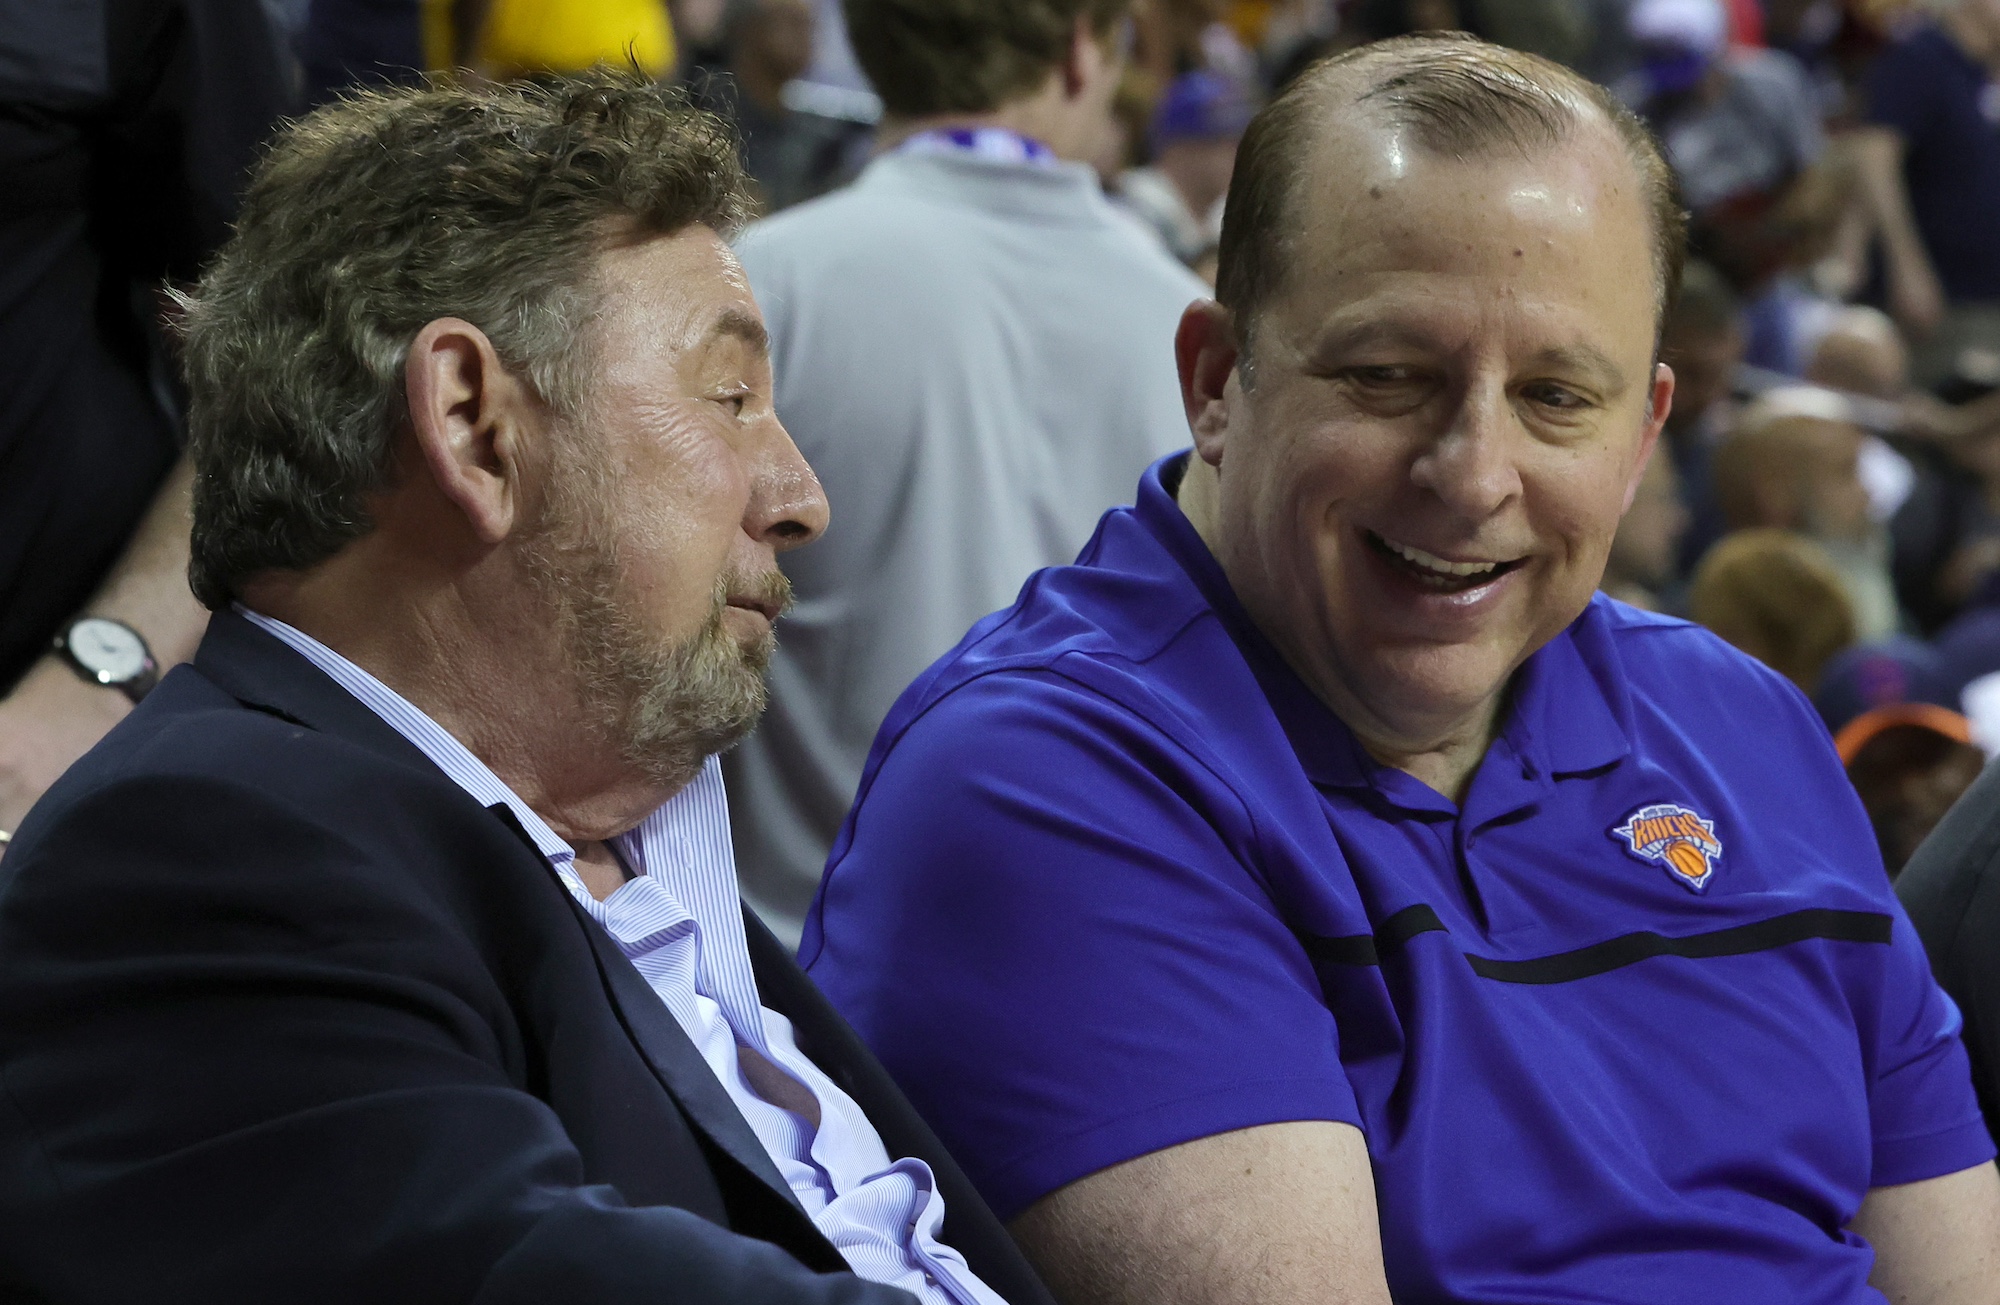 LAS VEGAS, NEVADA - JULY 08: Owner James Dolan (L) and head coach Tom Thibodeau of the New York Knicks attend the 2022 NBA Summer League at the Thomas &amp; Mack Center on July 08, 2022 in Las Vegas, Nevada. NOTE TO USER: User expressly acknowledges and agrees that, by downloading and or using this photograph, User is consenting to the terms and conditions of the Getty Images License Agreement. (Photo by Ethan Miller/Getty Images)